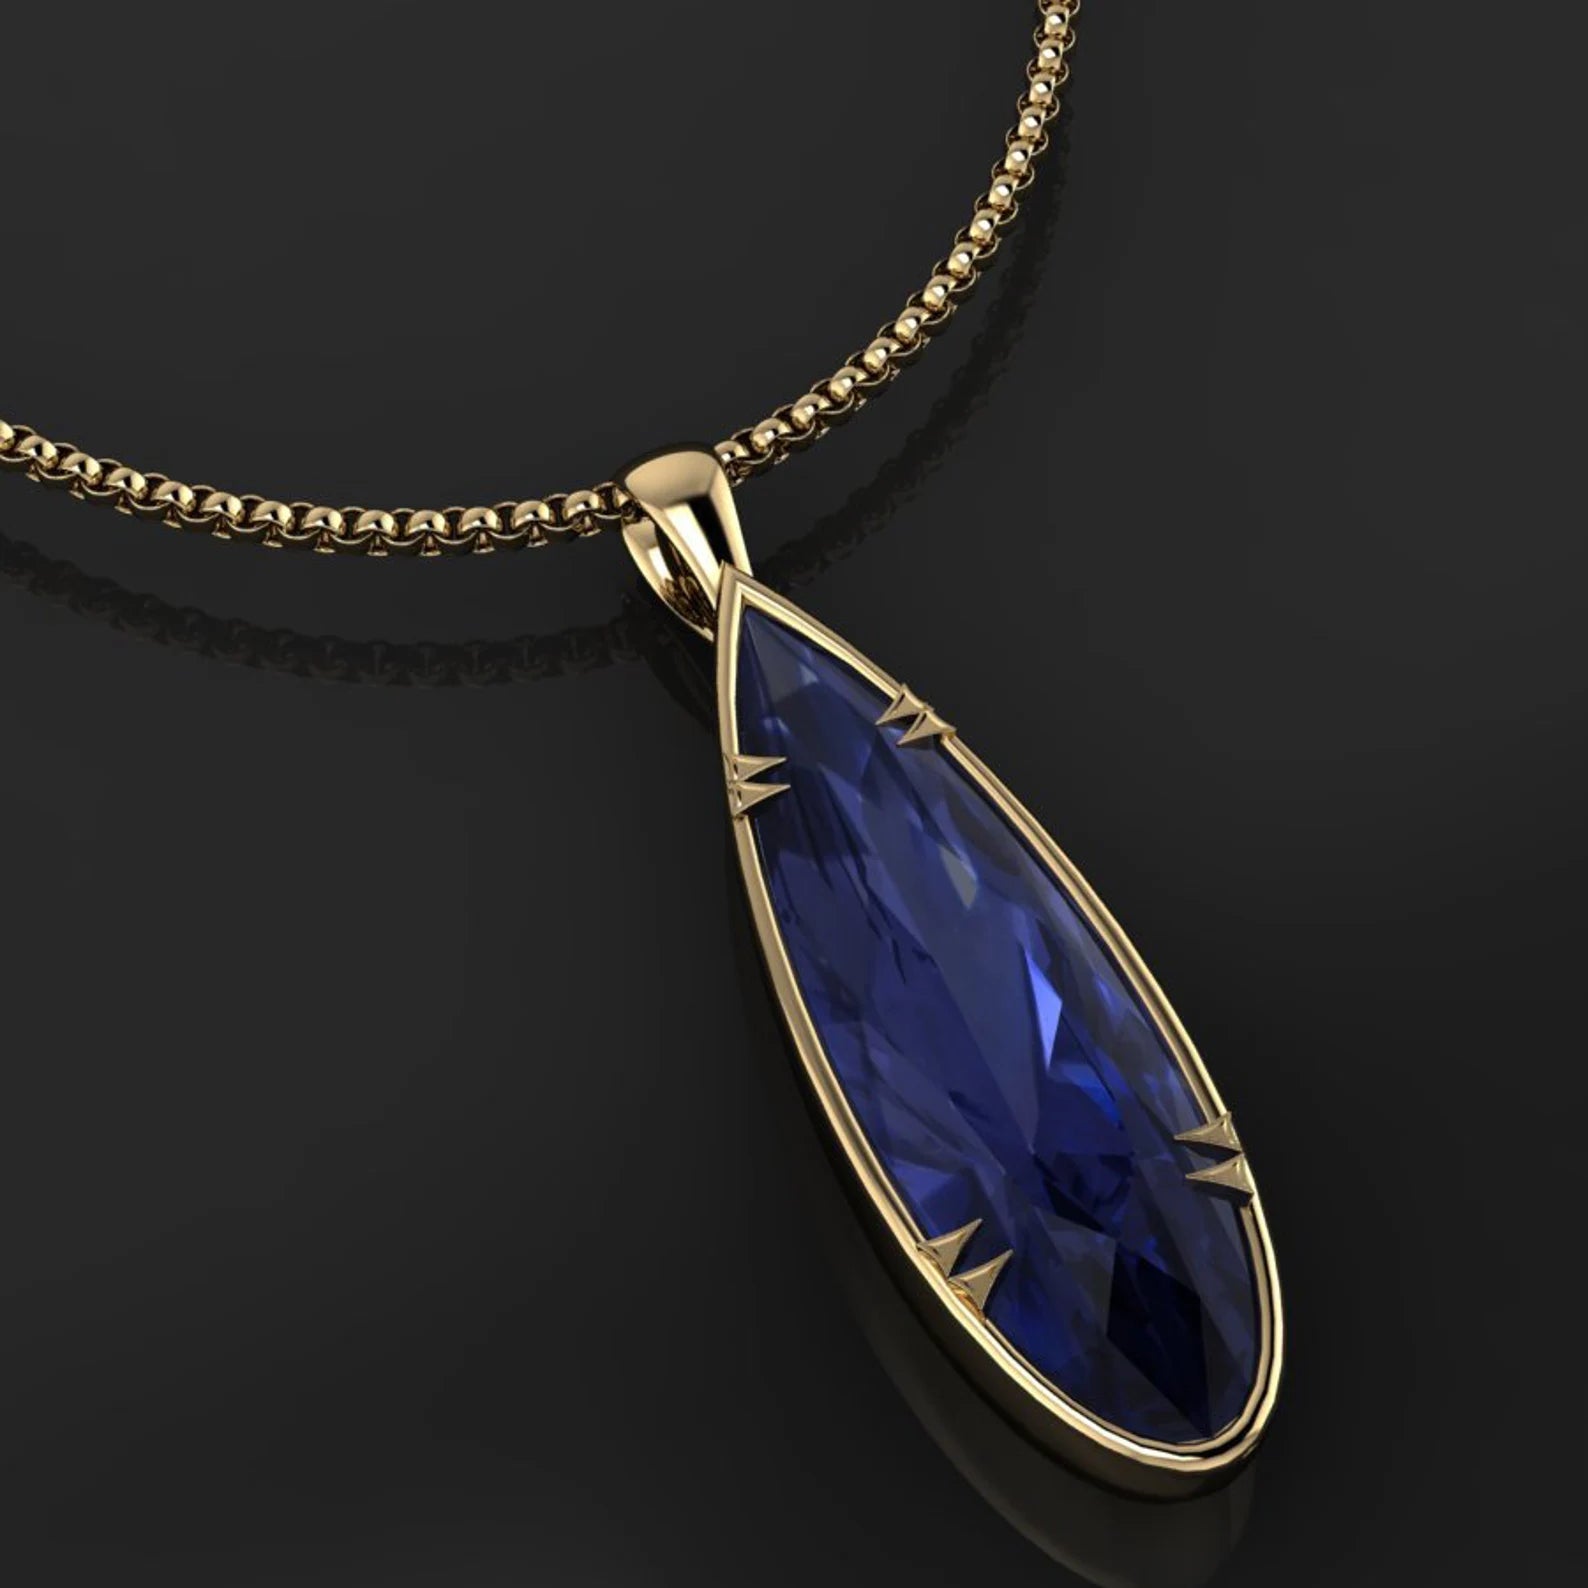 stabby pear pendant - 15 carat lab grown sapphire necklace - J Hollywood Designs